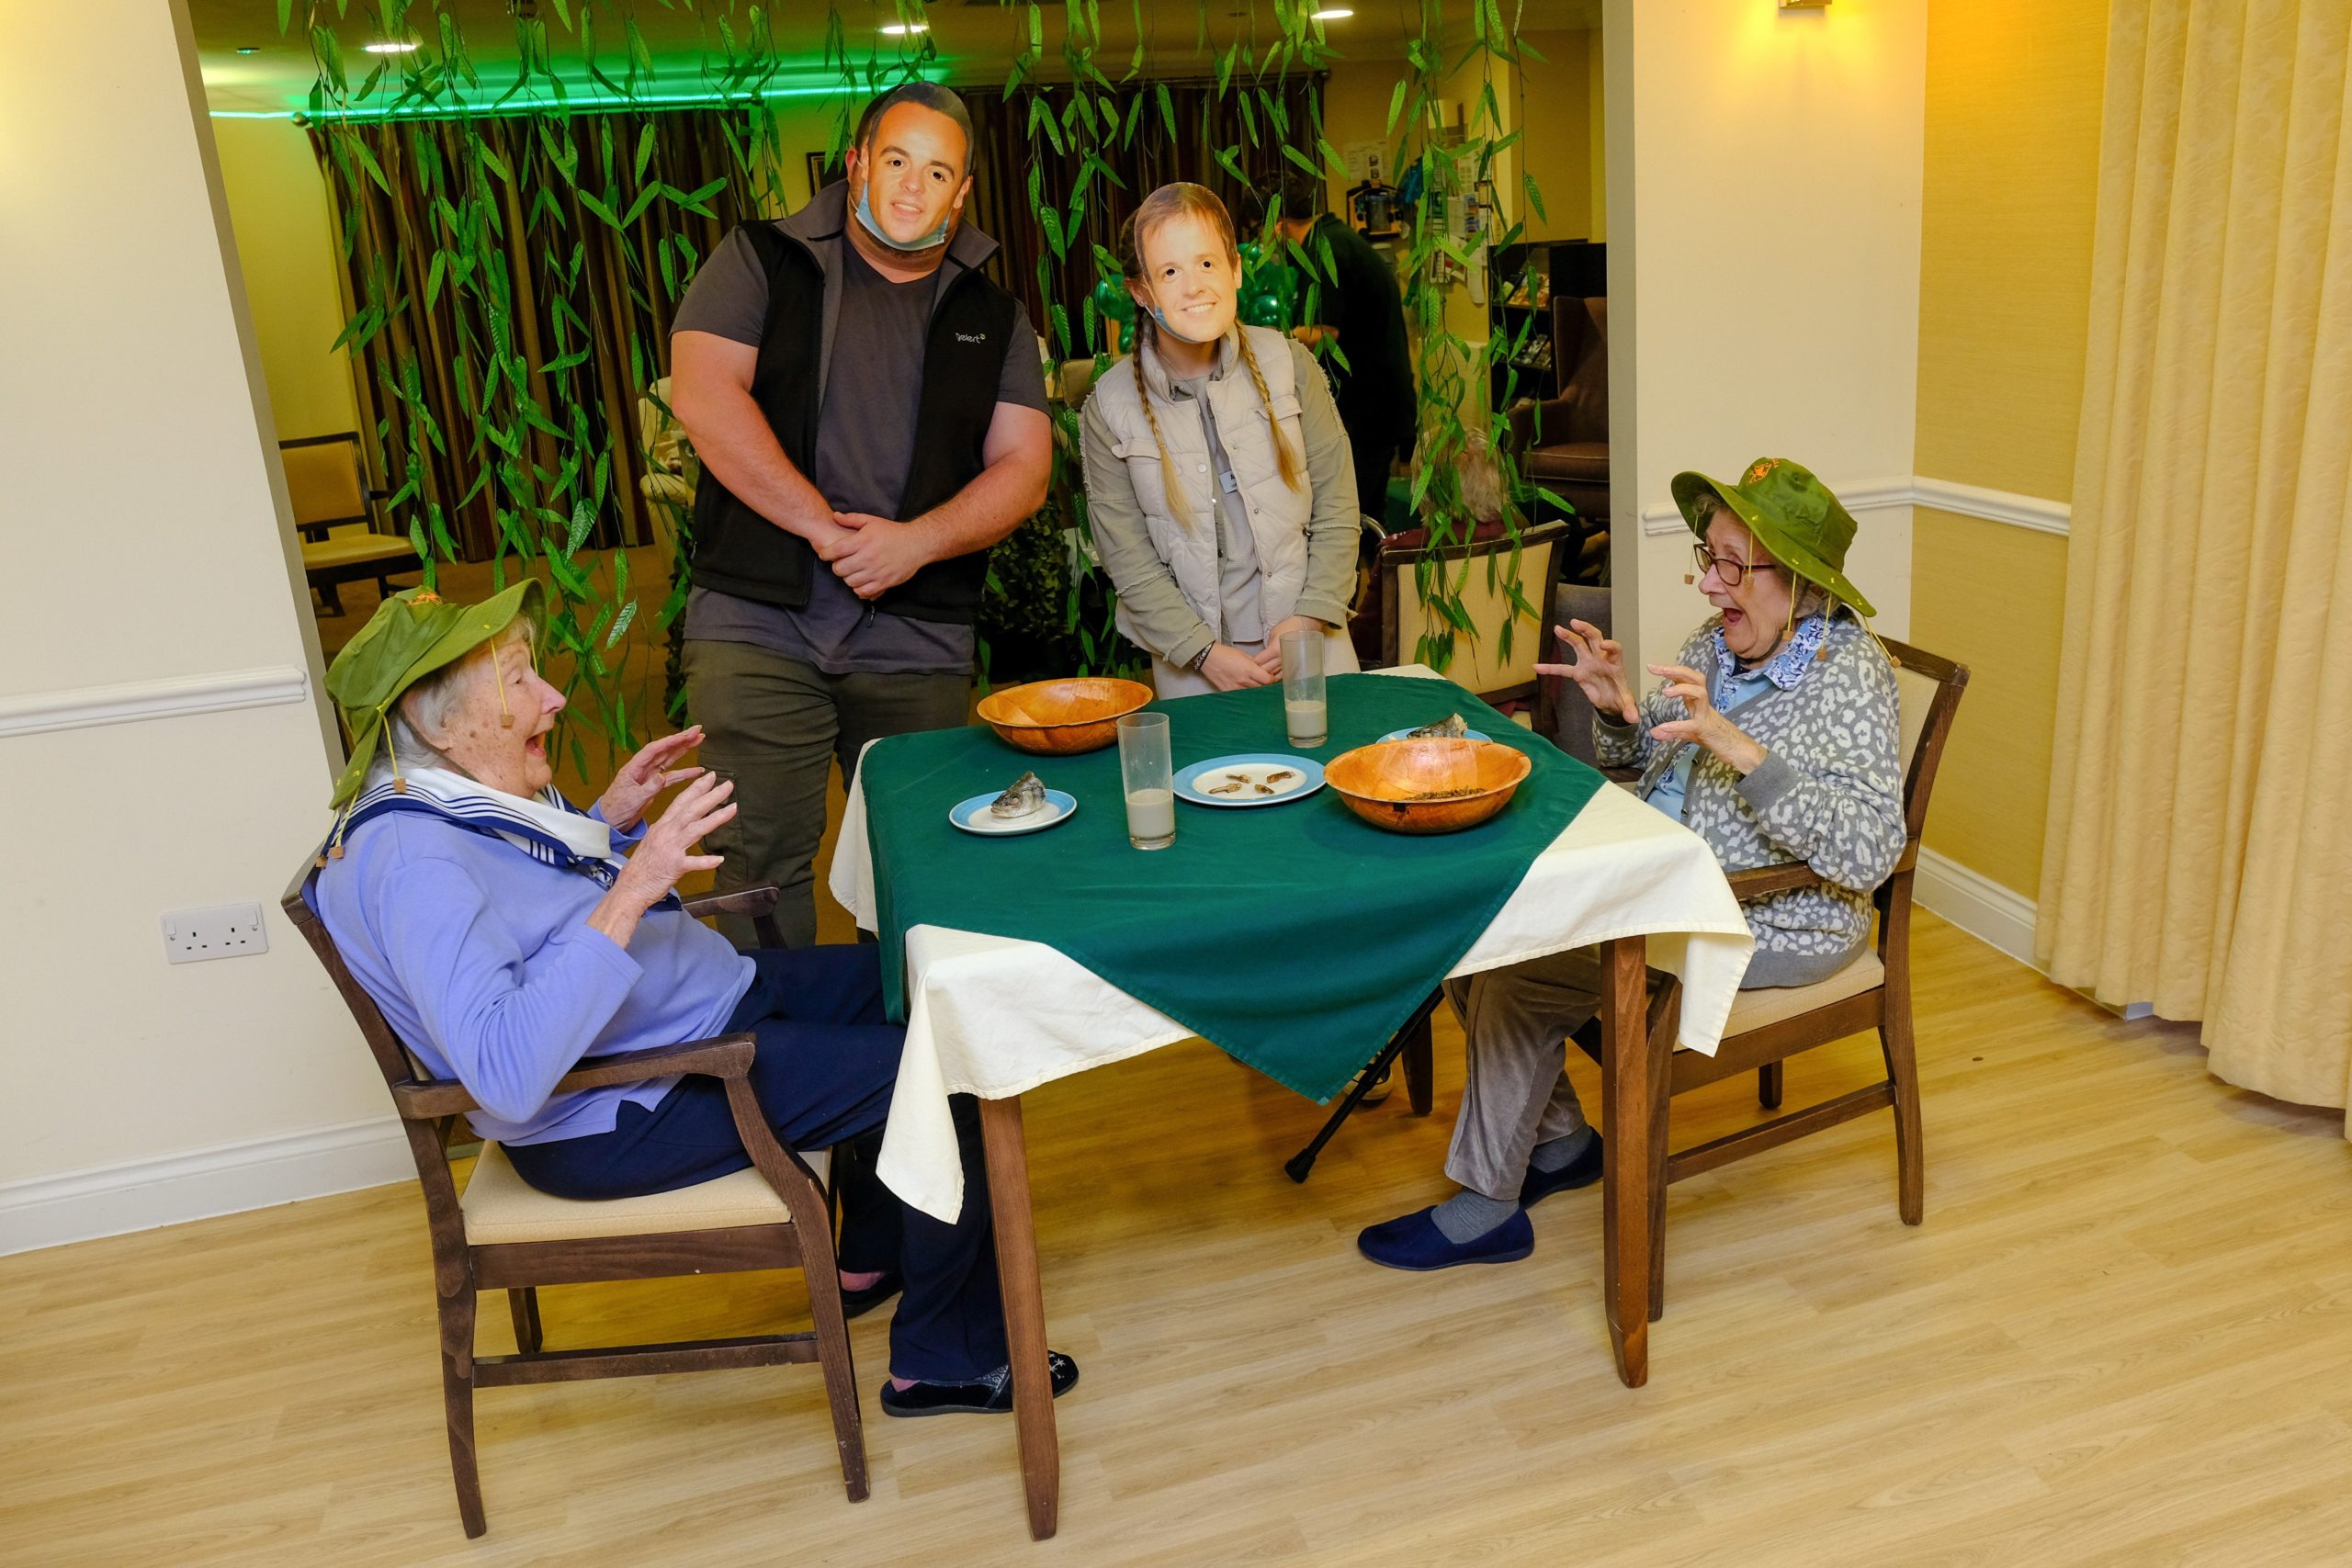 Pensioners take on their own I’m A Celebrity… bushtucker trials in care home